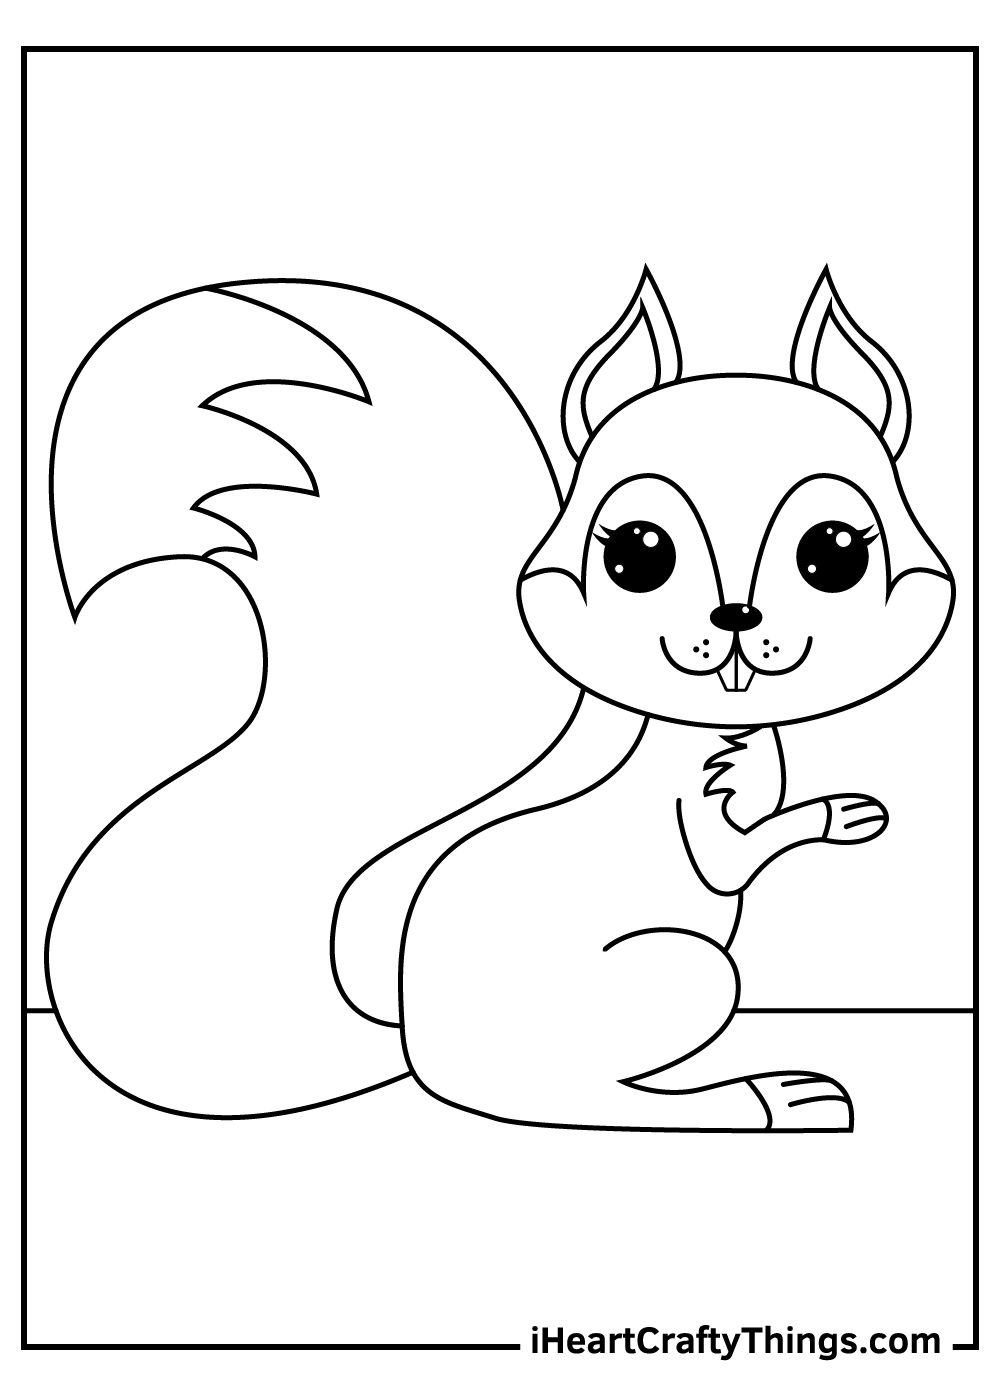 Printable Squirrels Coloring Pages Updated 2021 